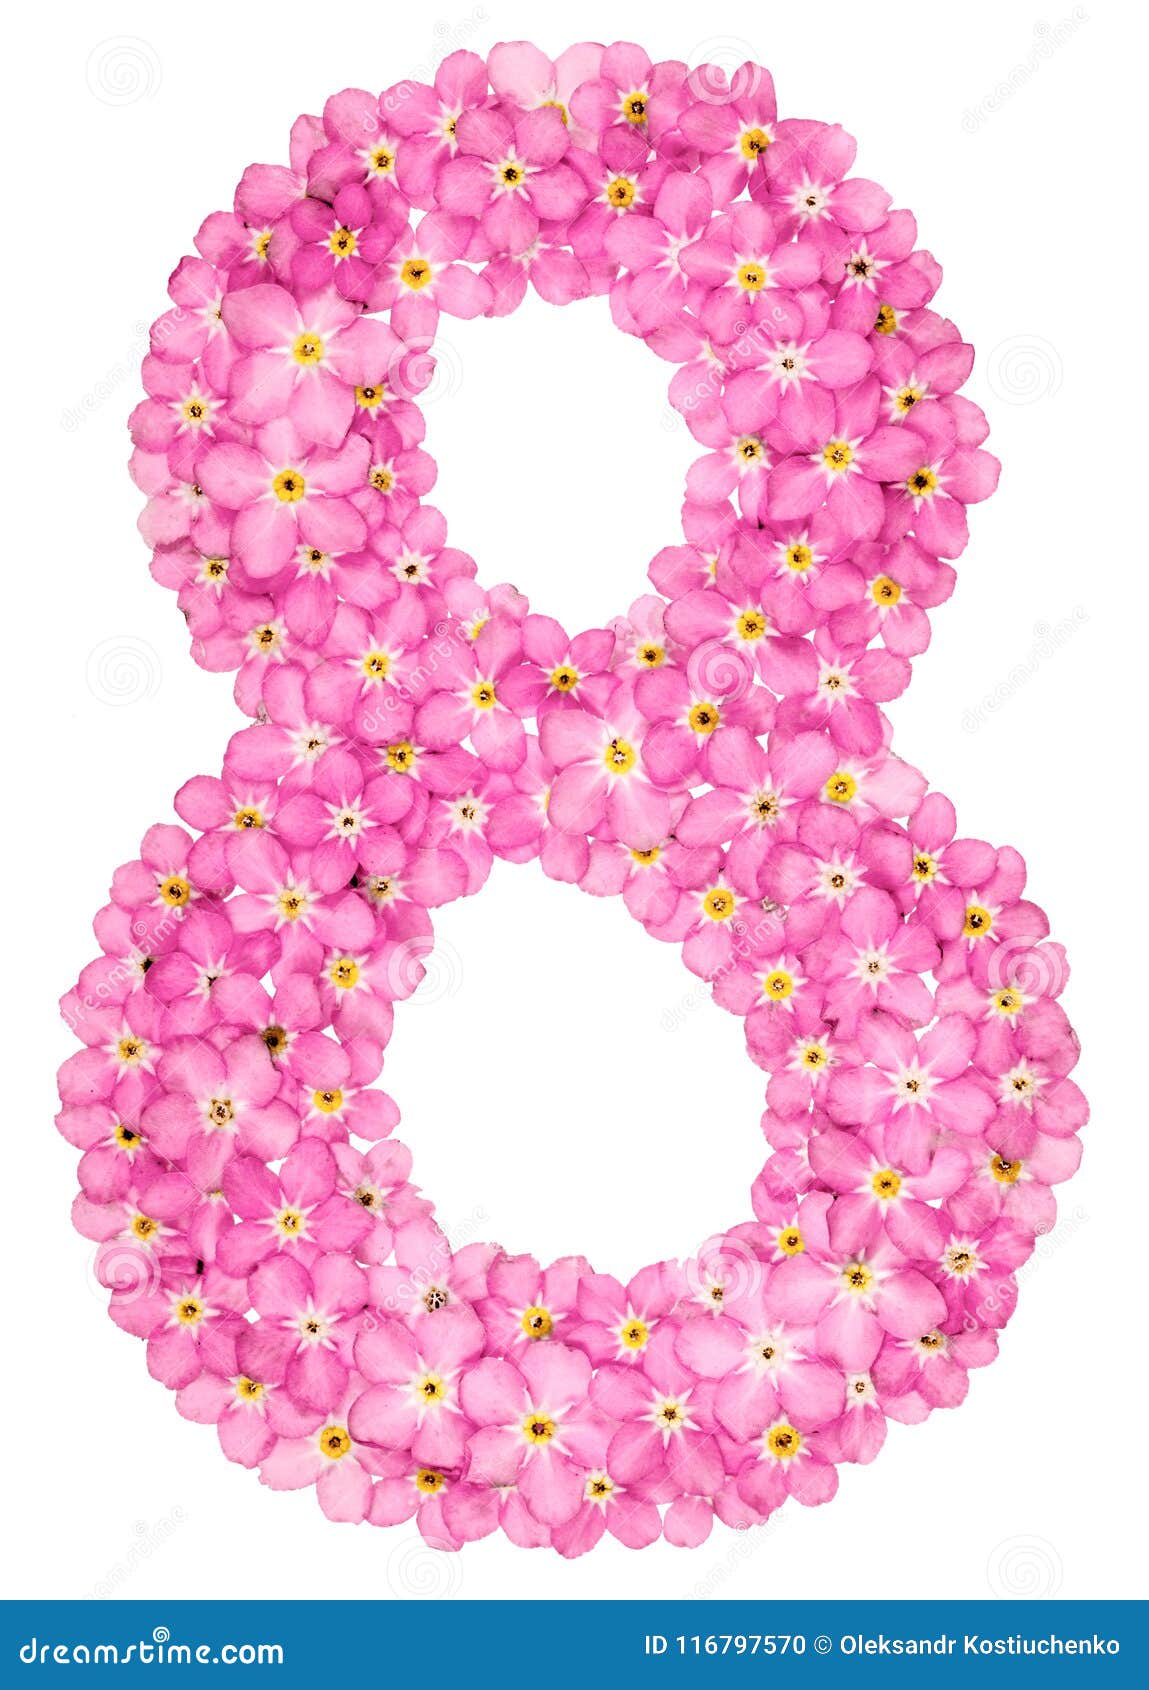 arabic numeral 8, eight, from pink forget-me-not flowers, isolat